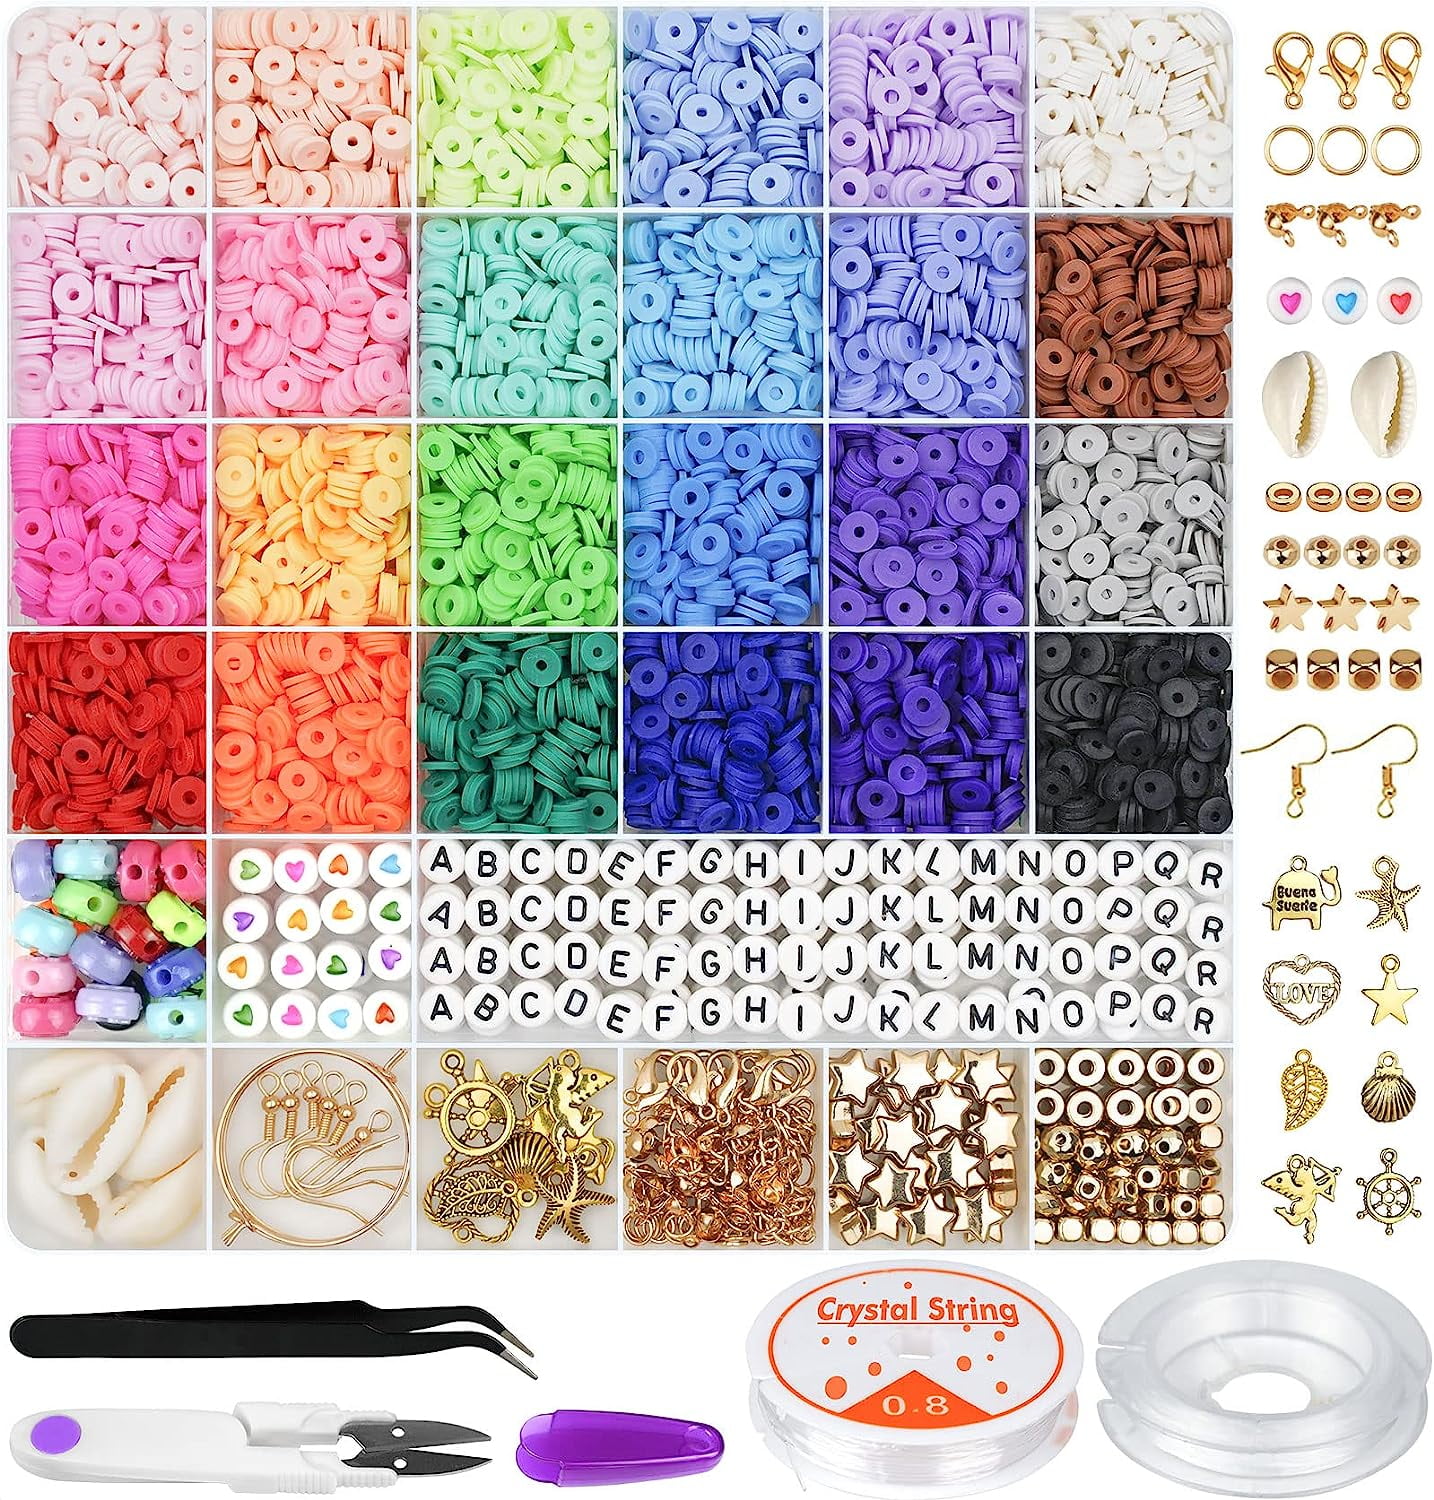 For the Love of Beading Kits Make Your Own Stretch Elastic Cording